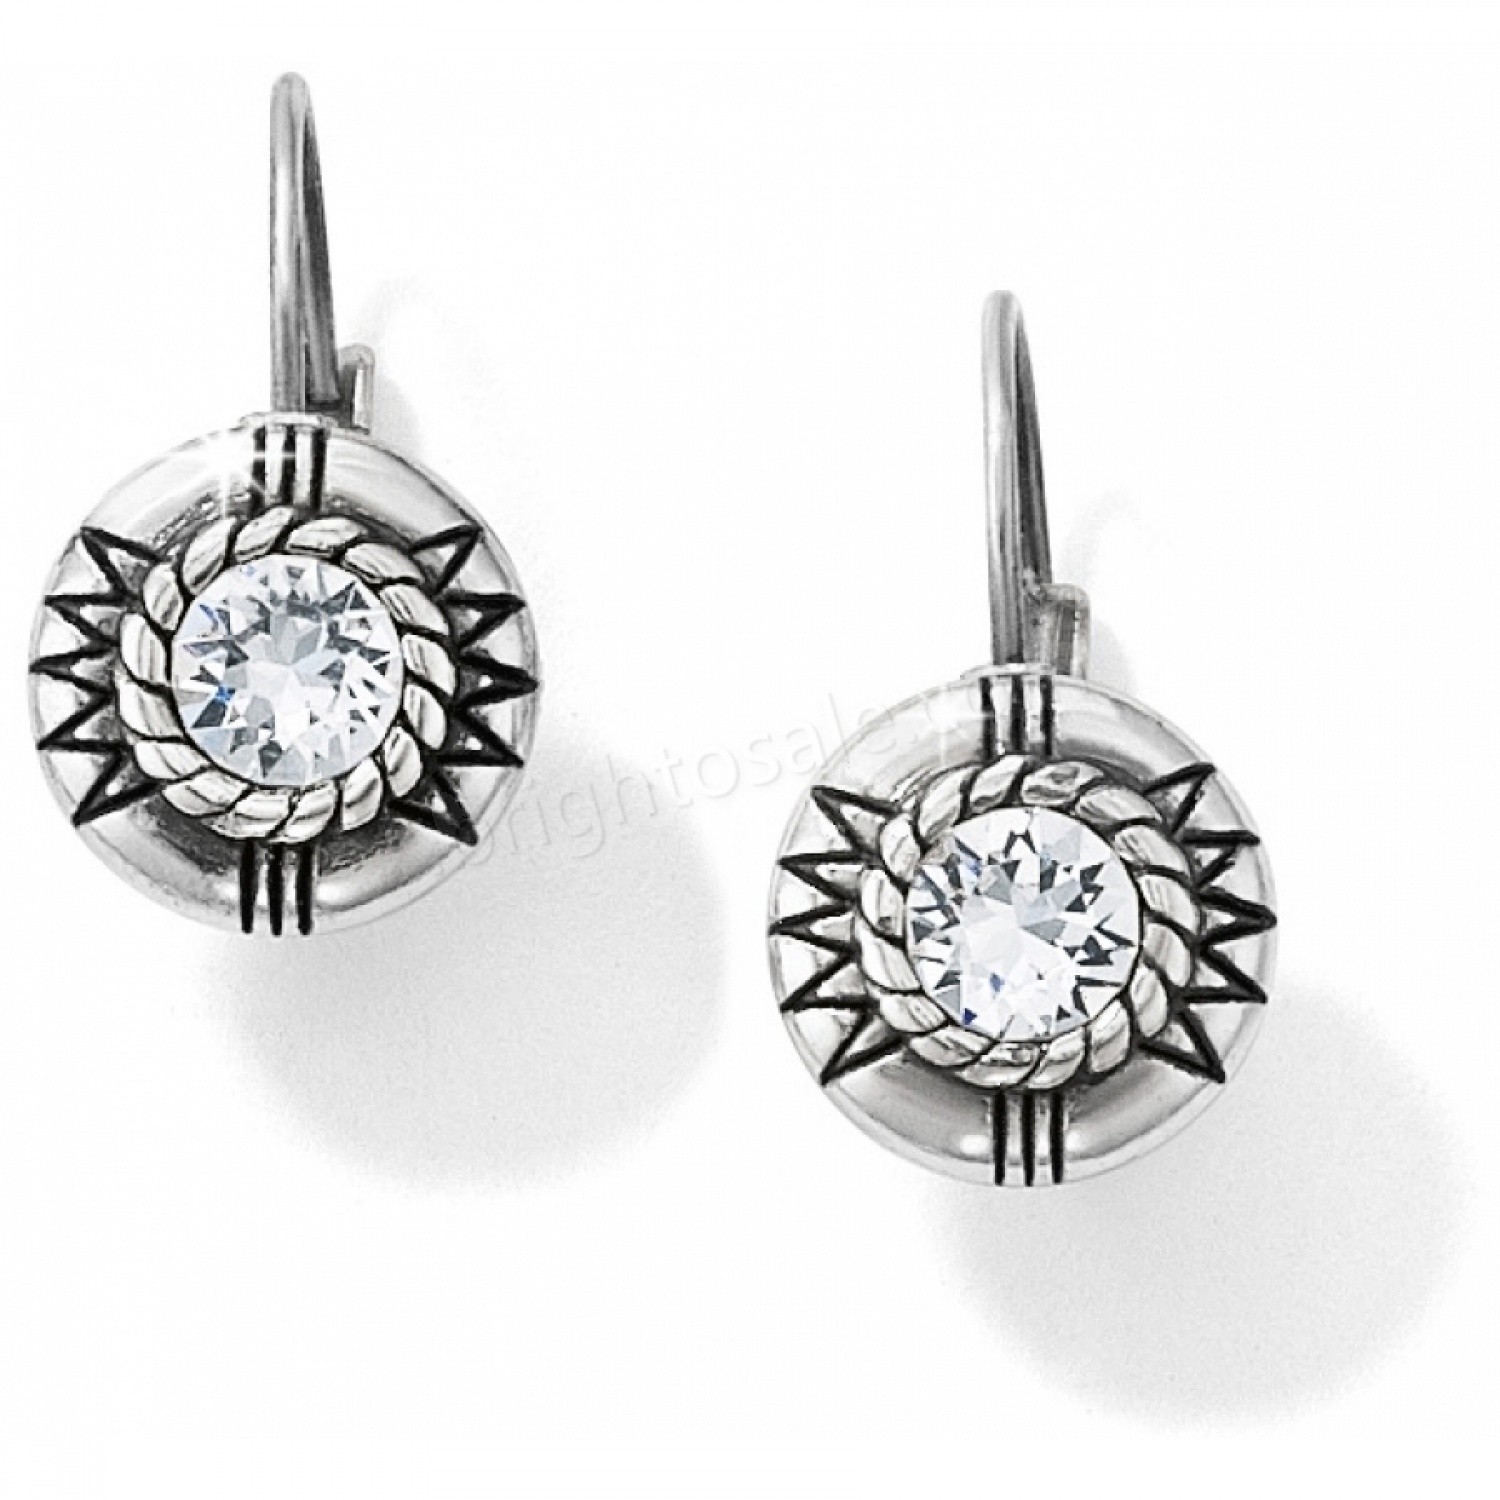 Brighton Collectibles & Online Discount Fortino Leverback Earrings - Brighton Collectibles & Online Discount Fortino Leverback Earrings